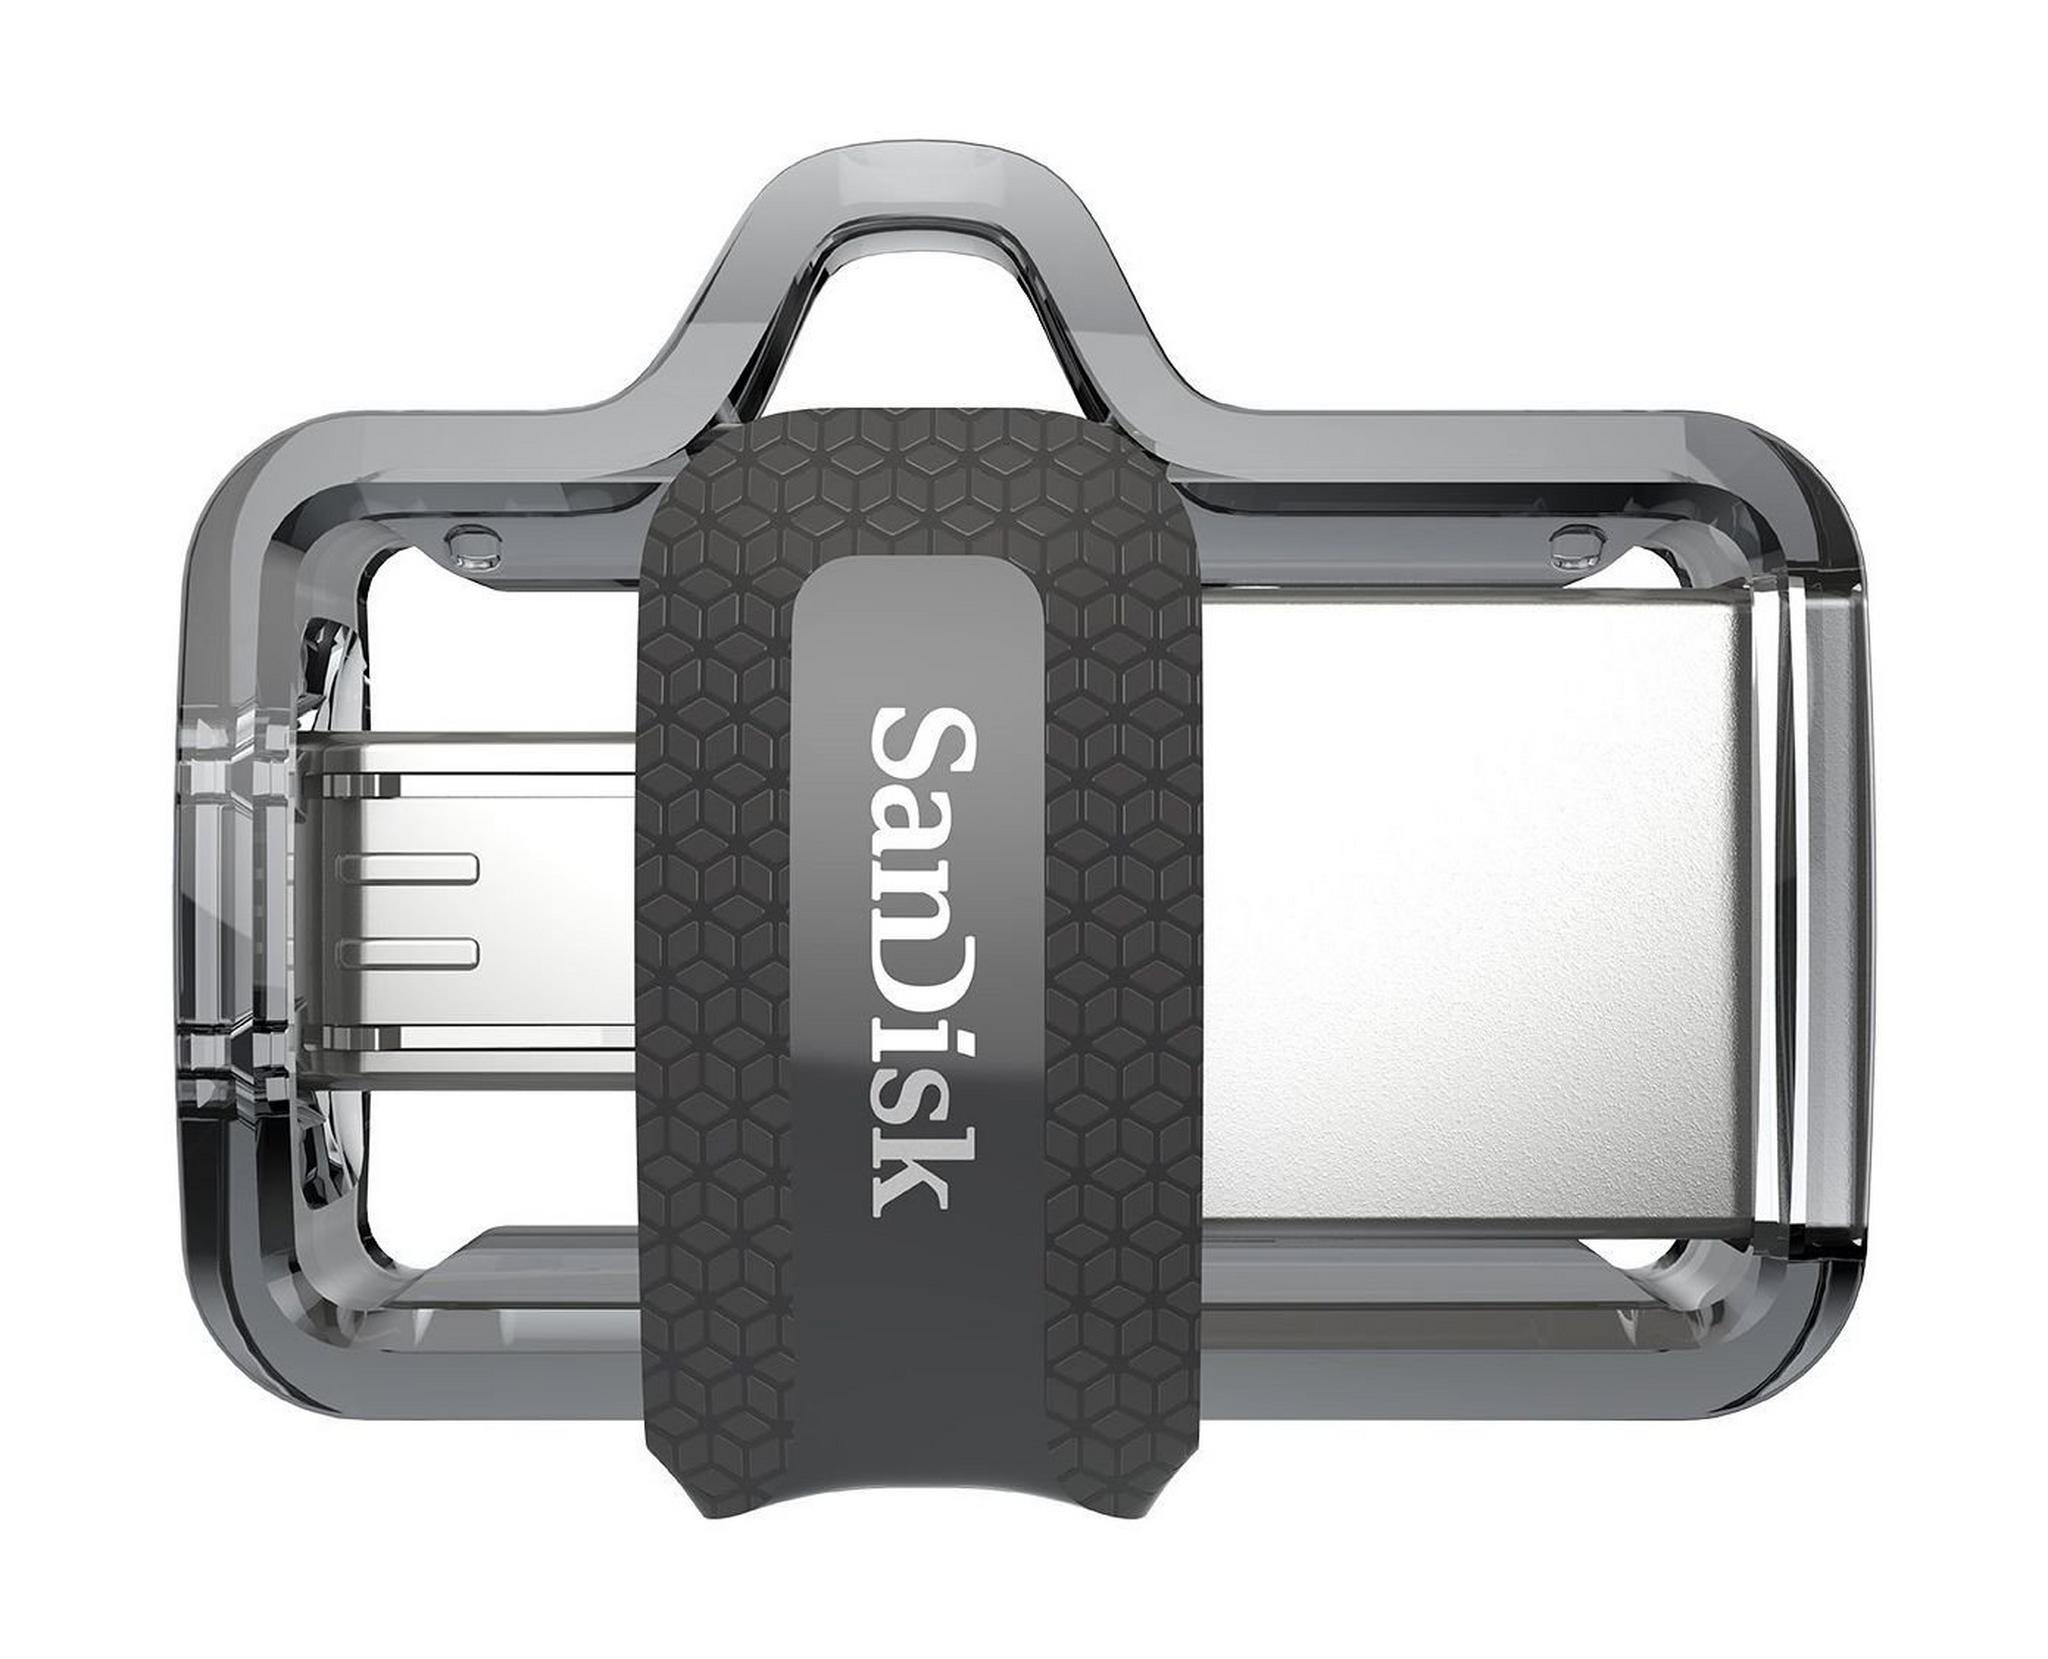 Sandisk 16GB M3.0 Dual USB Drive for Android Devices & Computer - (DD3-016-G46)